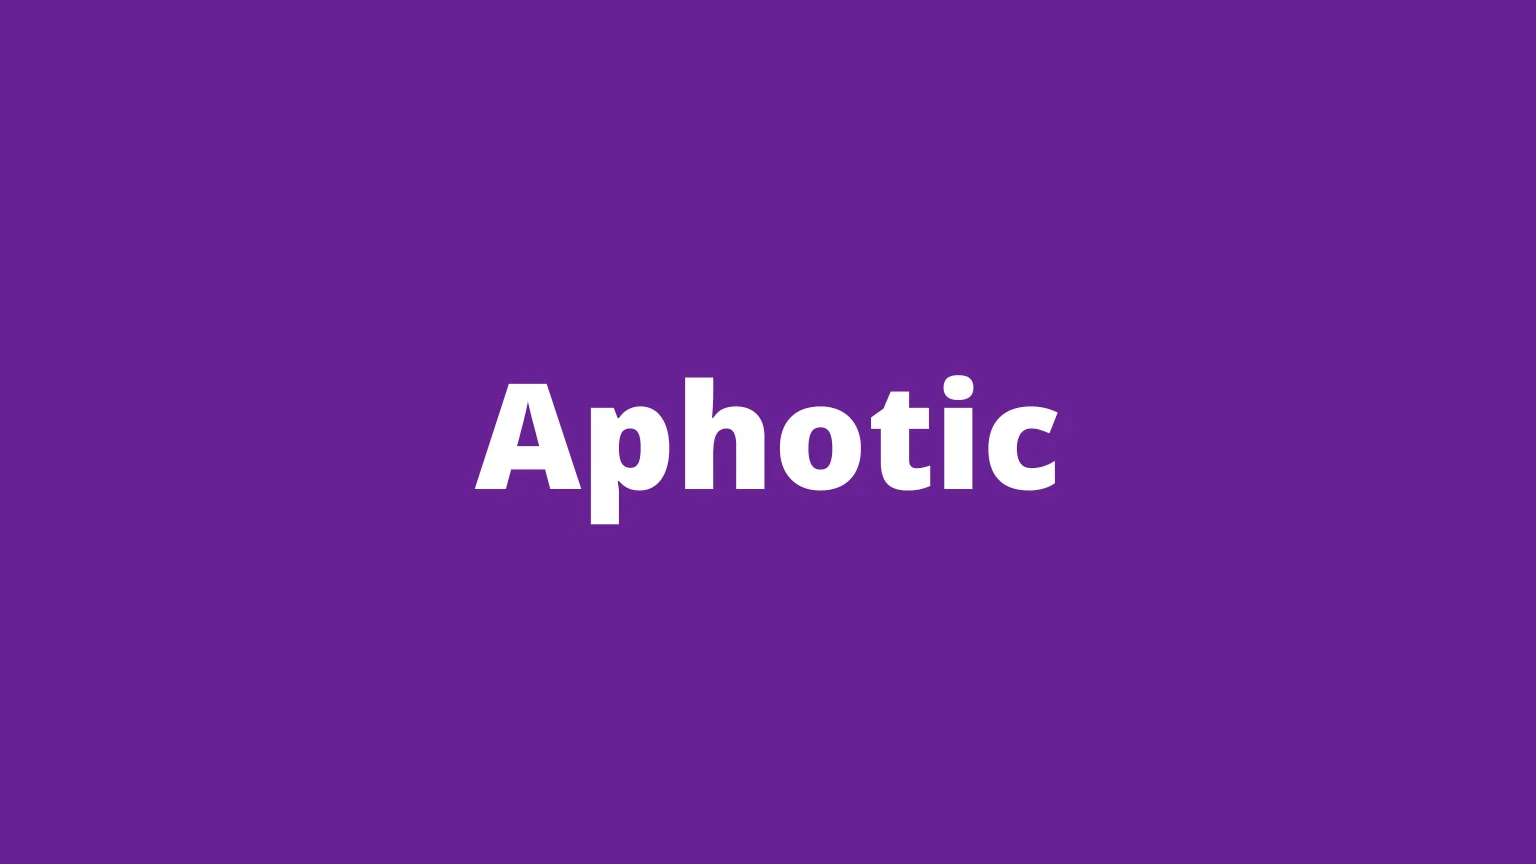 The word aphotic and its meaning